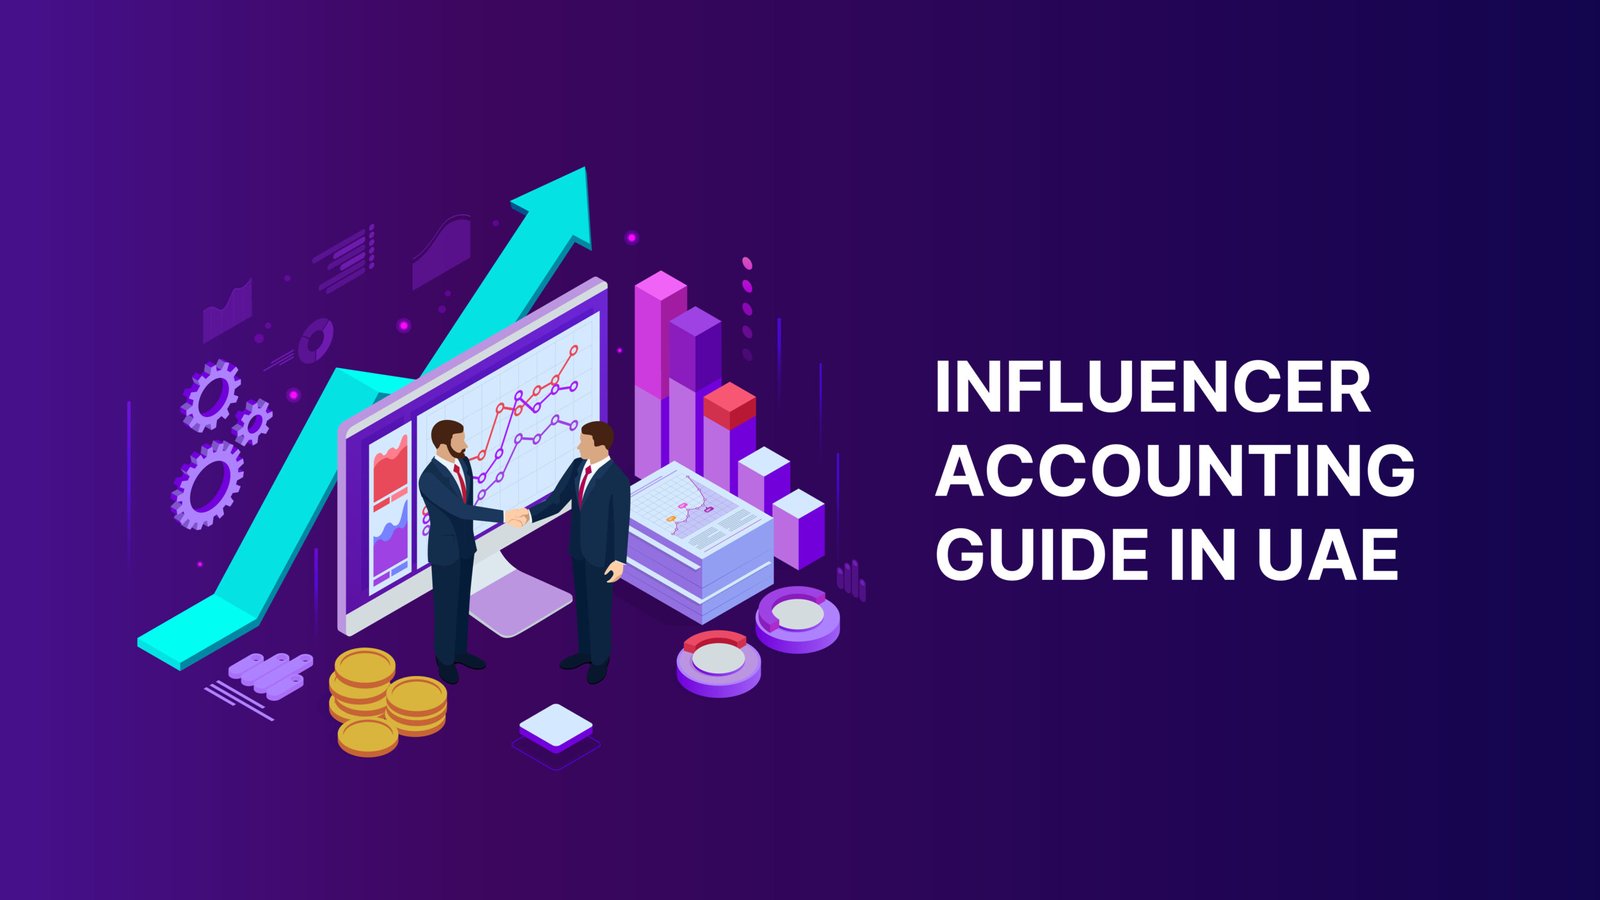 Influencer Accounting Guide in UAE